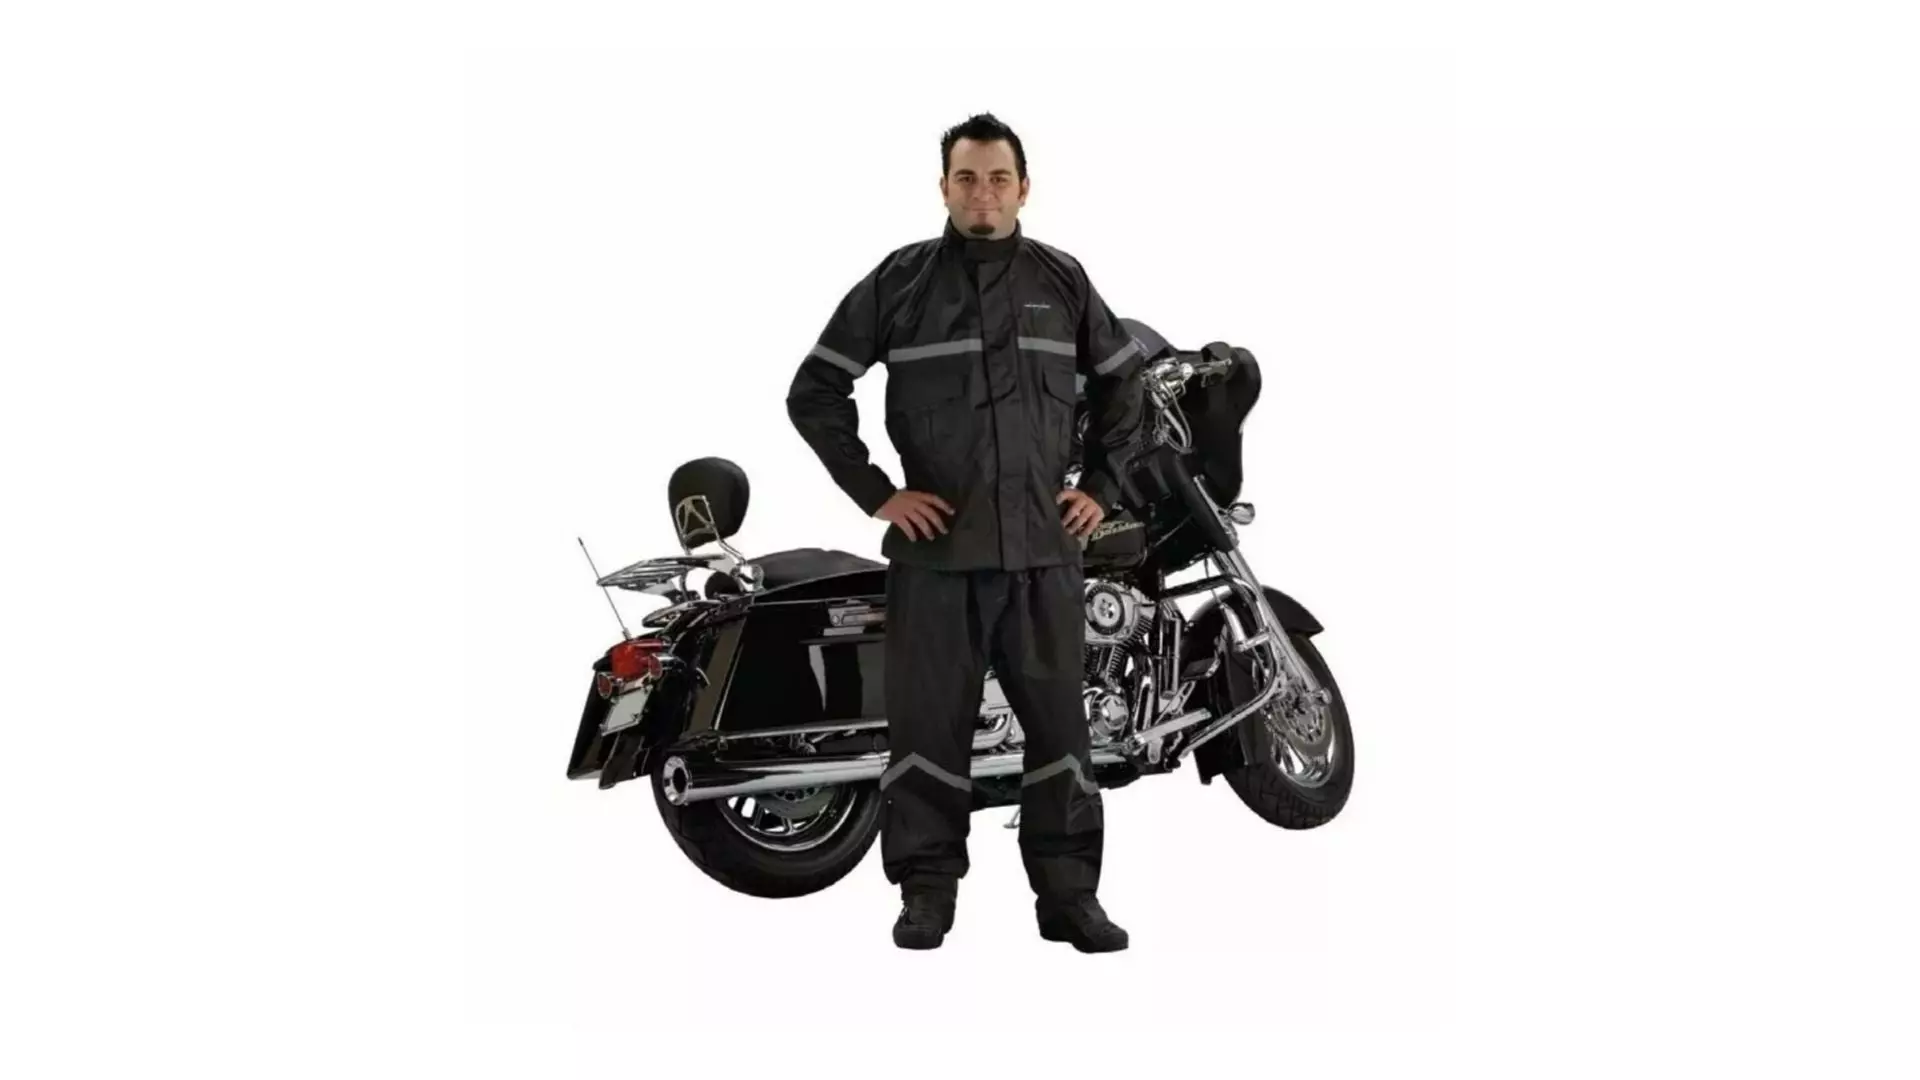 Protect Yourself in Wet Weather With These Motorcycle Rain Gear Sets